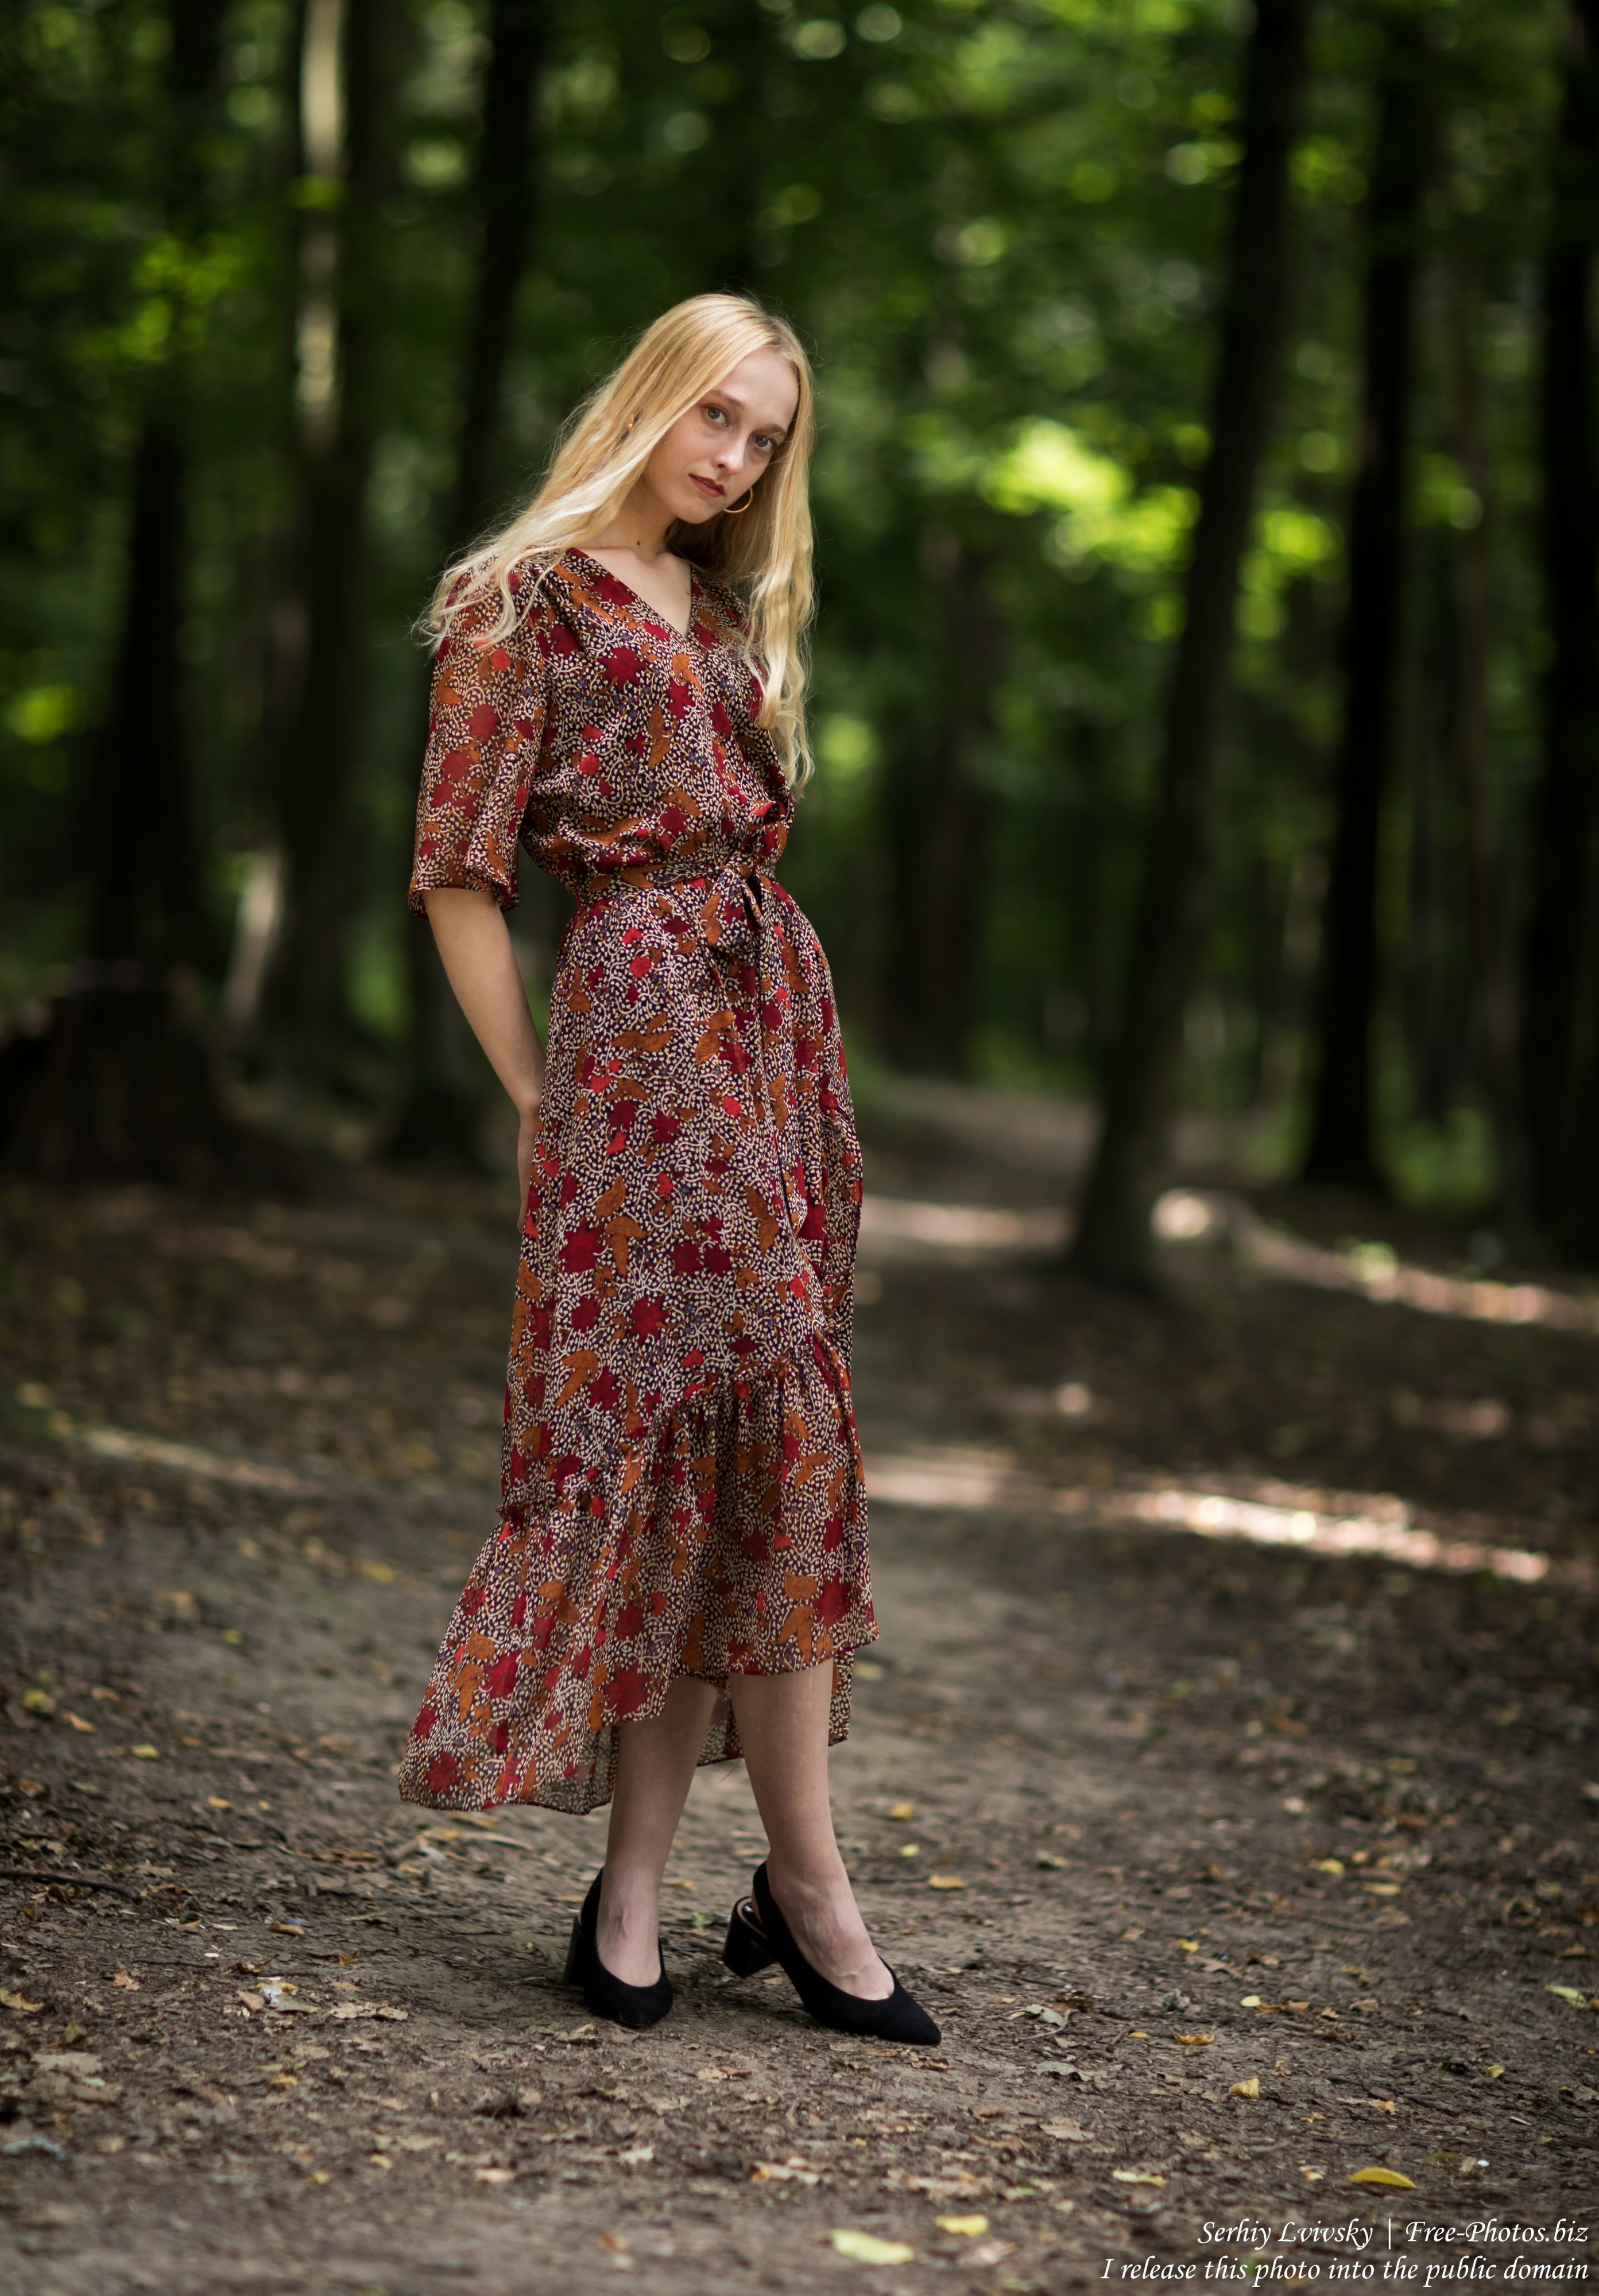 Photo Of Sonya A 21 Year Old Natural Blonde Girl Photographed In July 2019 By Serhiy Lvivsky